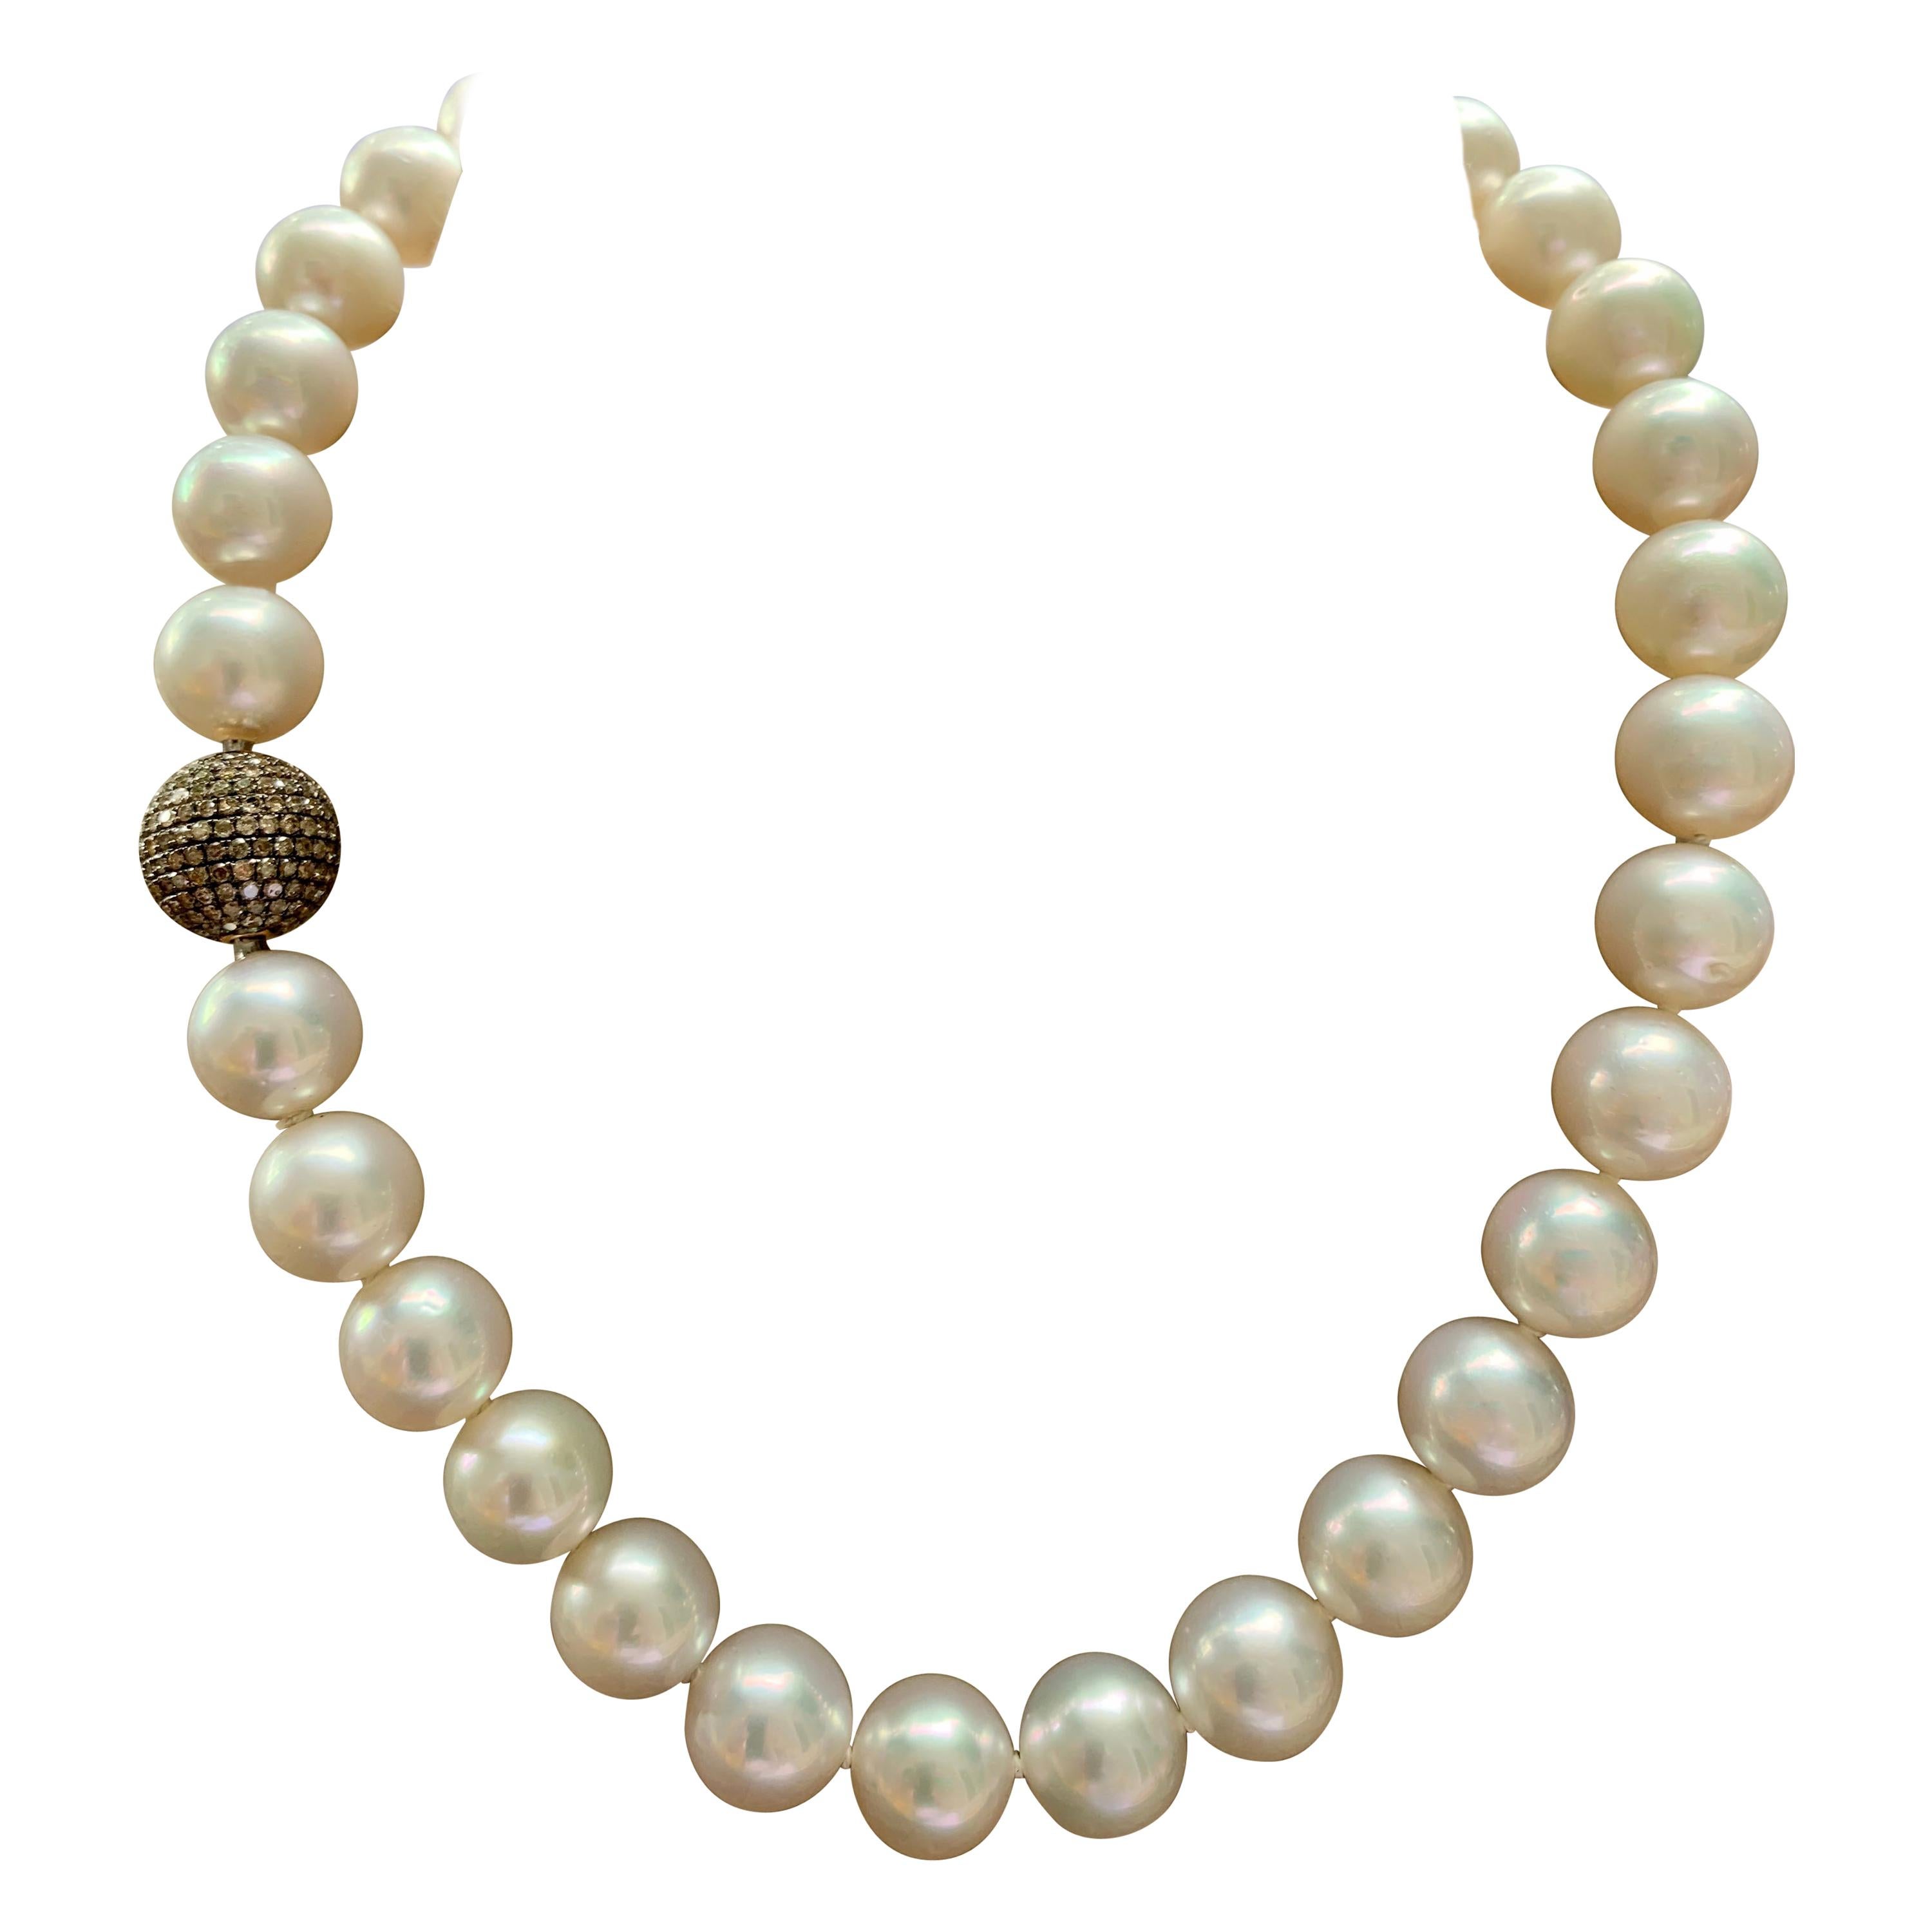 South Sea Pearl Necklace with Champagne Colored Diamond Clasp